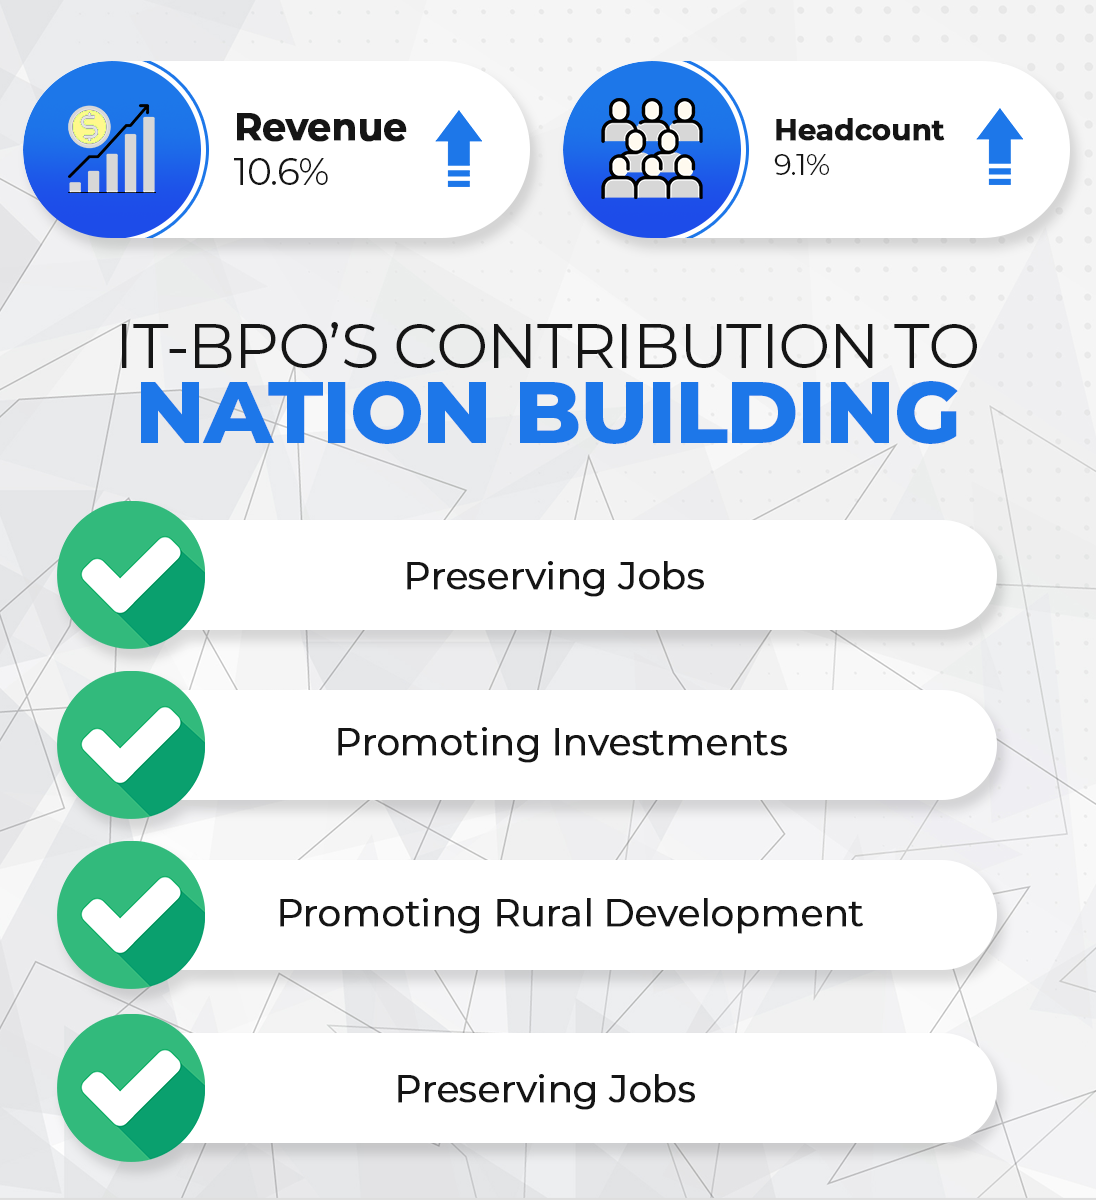 IT BPOS CONTRIBUTION TO NATION BUILDING INFOGRAPHIC